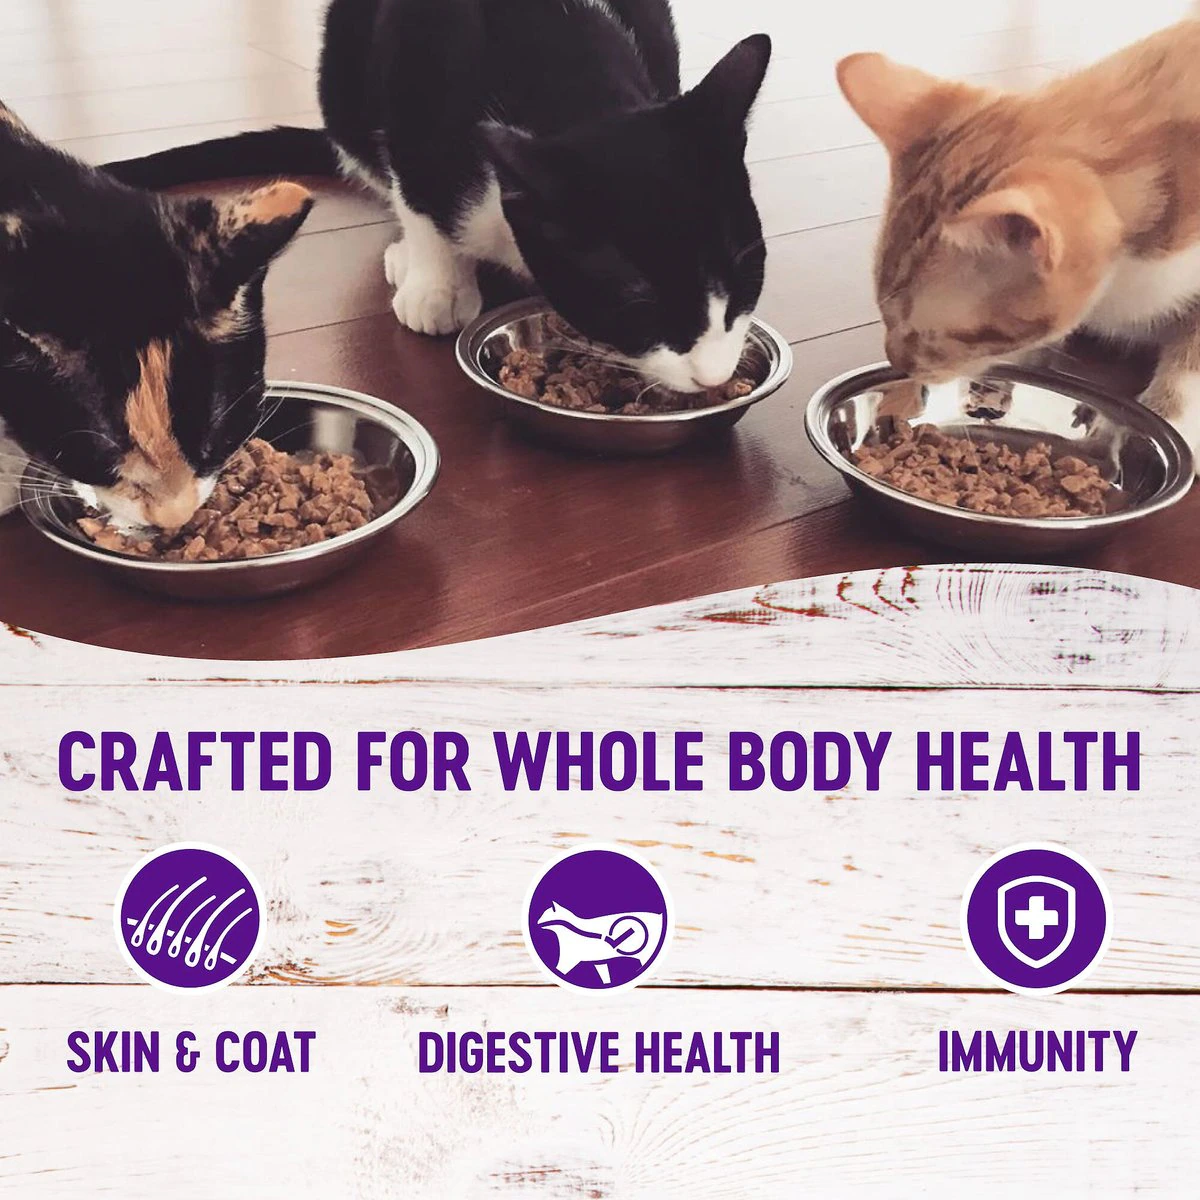 Wellness Healthy Indulgence Morsels Chicken & Salmon Wet Cat Food  Canned Cat Food  | PetMax Canada